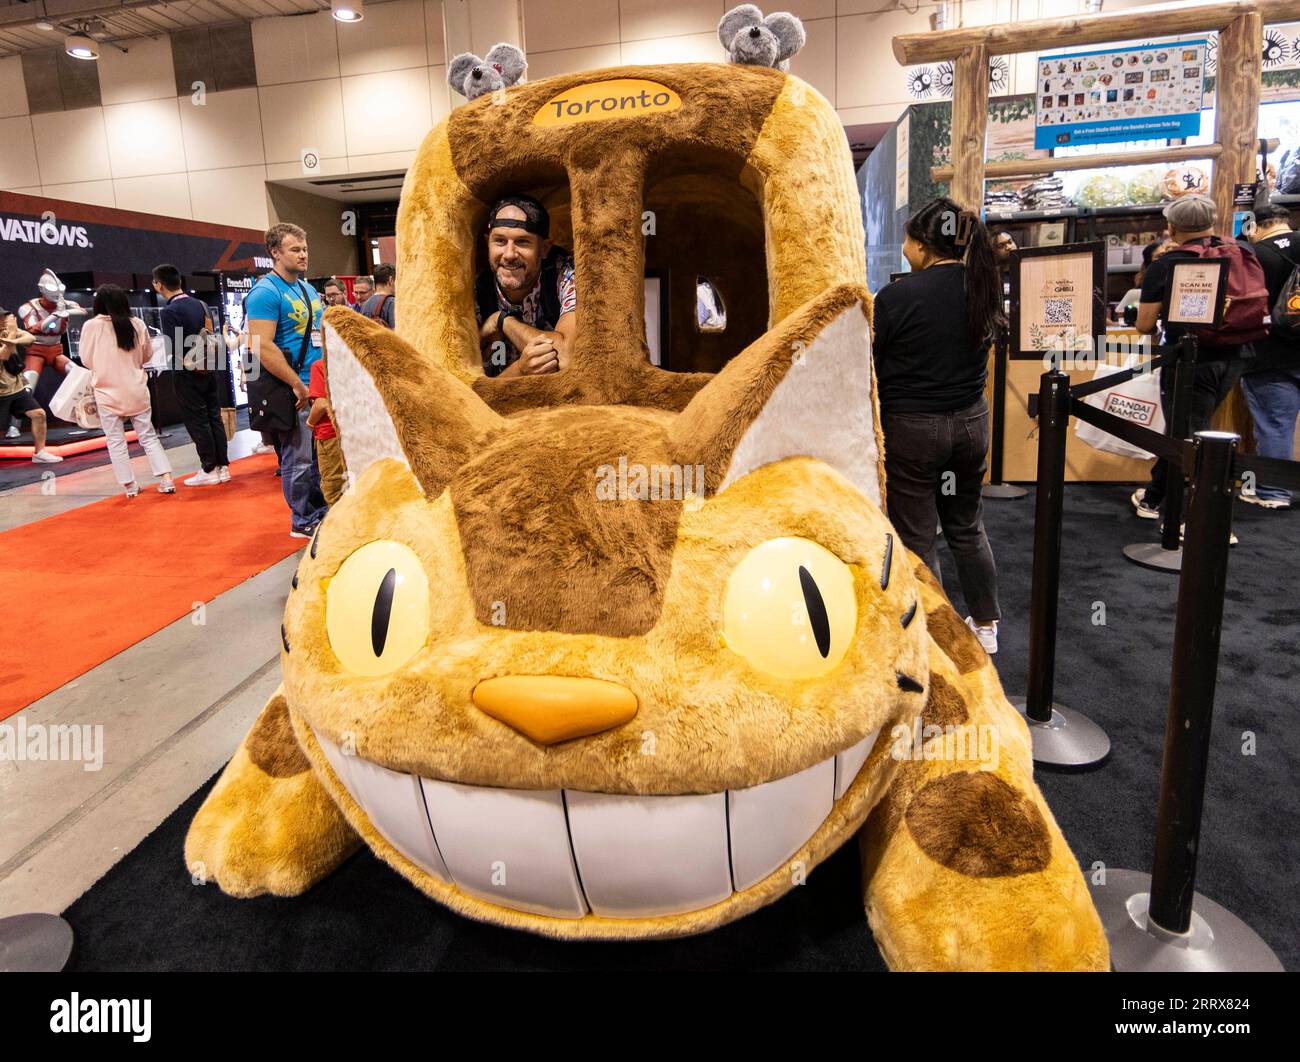 230825 -- TORONTO, Aug. 25, 2023 -- A man poses for photos on the Catbus during the 2023 Fan Expo Canada in Toronto, Canada, on Aug. 25, 2023. As one of the largest comics, sci-fi, anime and gaming events in Canada, the annual event is held here from Aug. 24 to Aug. 27, attracting hundreds of thousands of fans from across the world. Photo by /Xinhua CANADA-TORONTO-FAN EXPO CANADA ZouxZheng PUBLICATIONxNOTxINxCHN Stock Photo